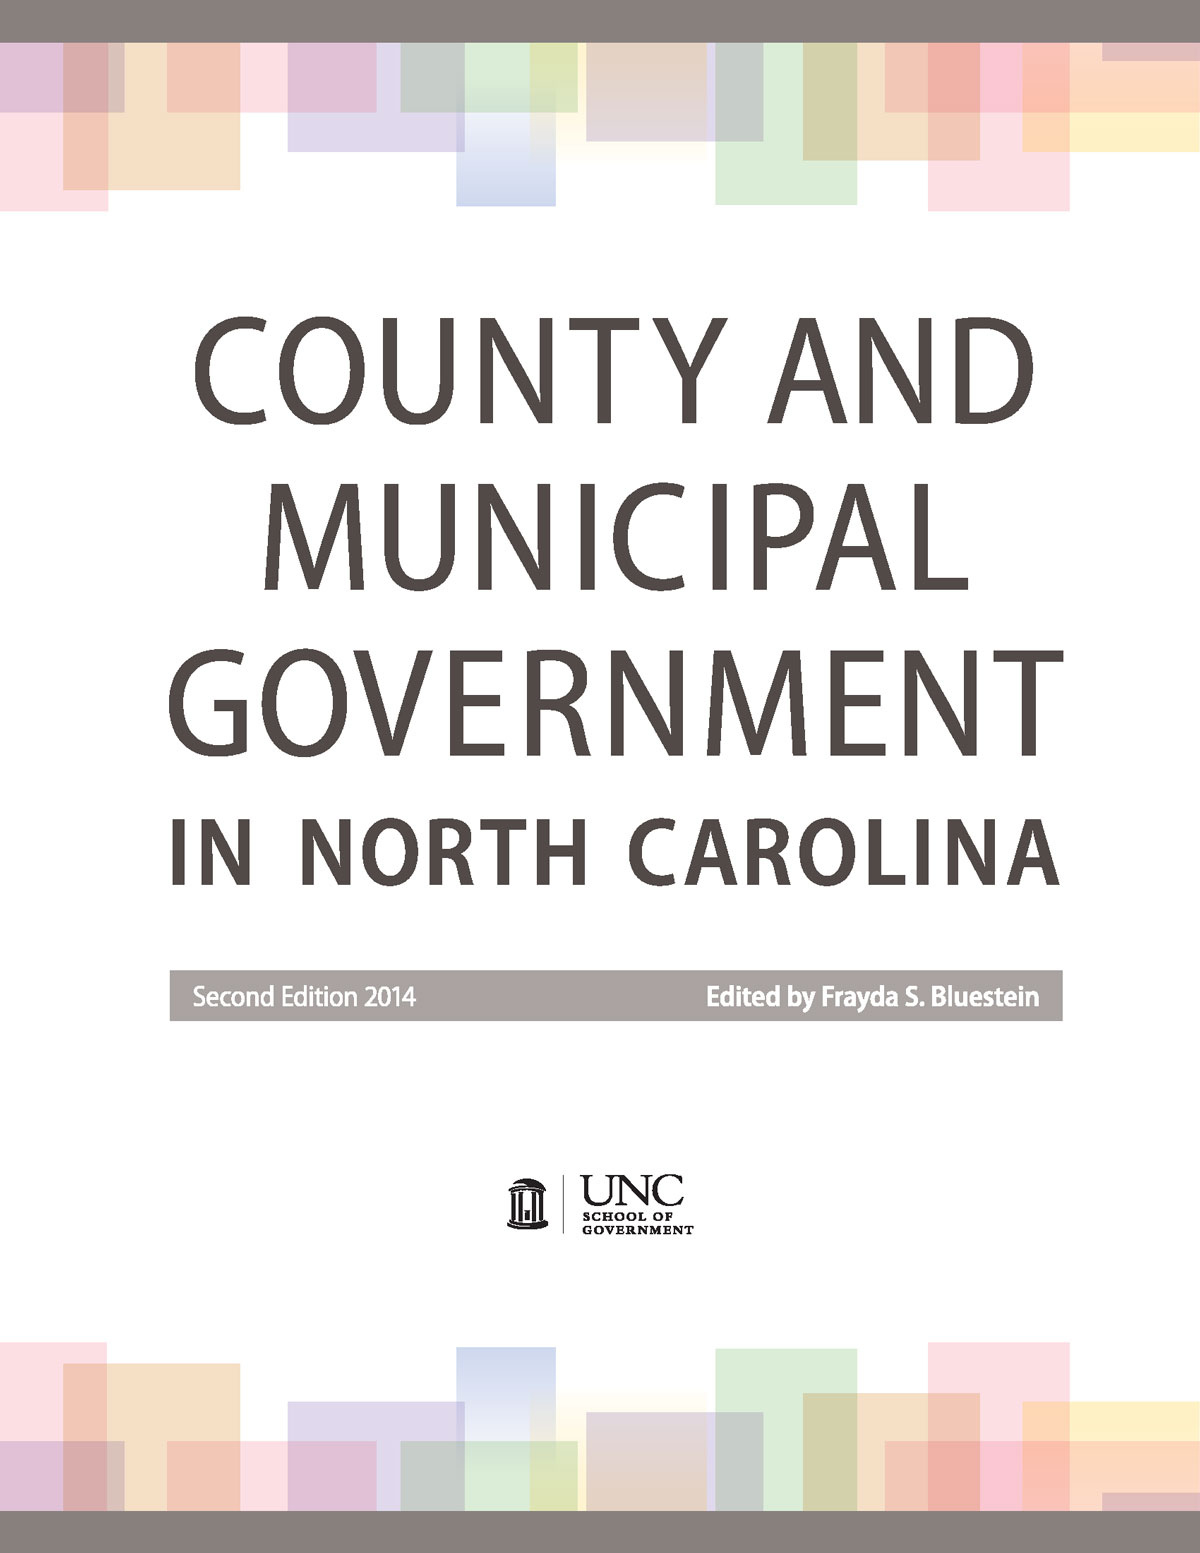 Cover image for County and Municipal Government in North Carolina, Second Edition, 2014 (Hard Copy Format)